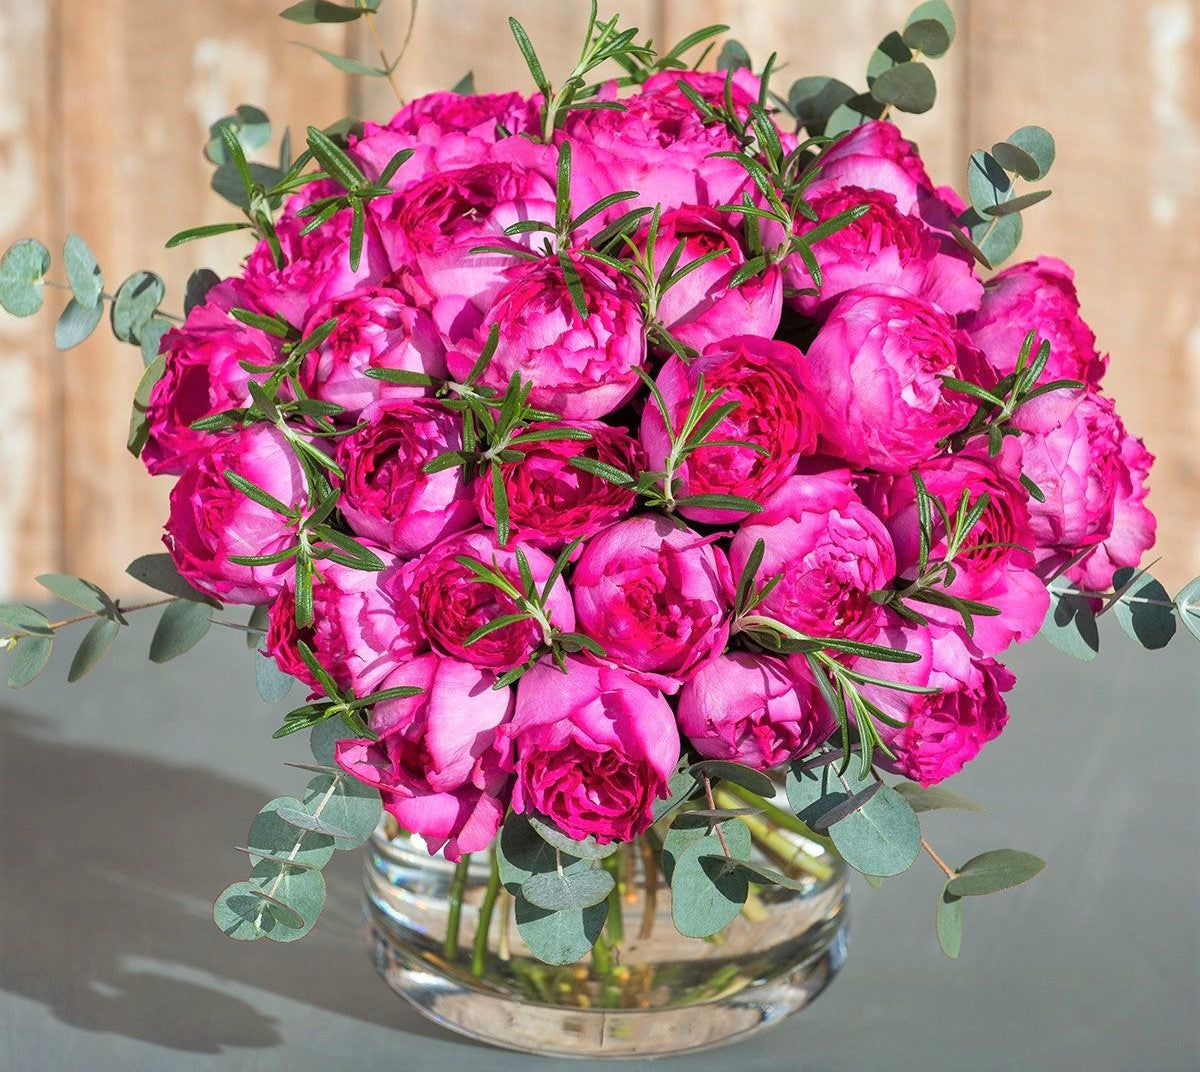 Roses For Cut Flowers Recommend For Bouquets Of Flowers